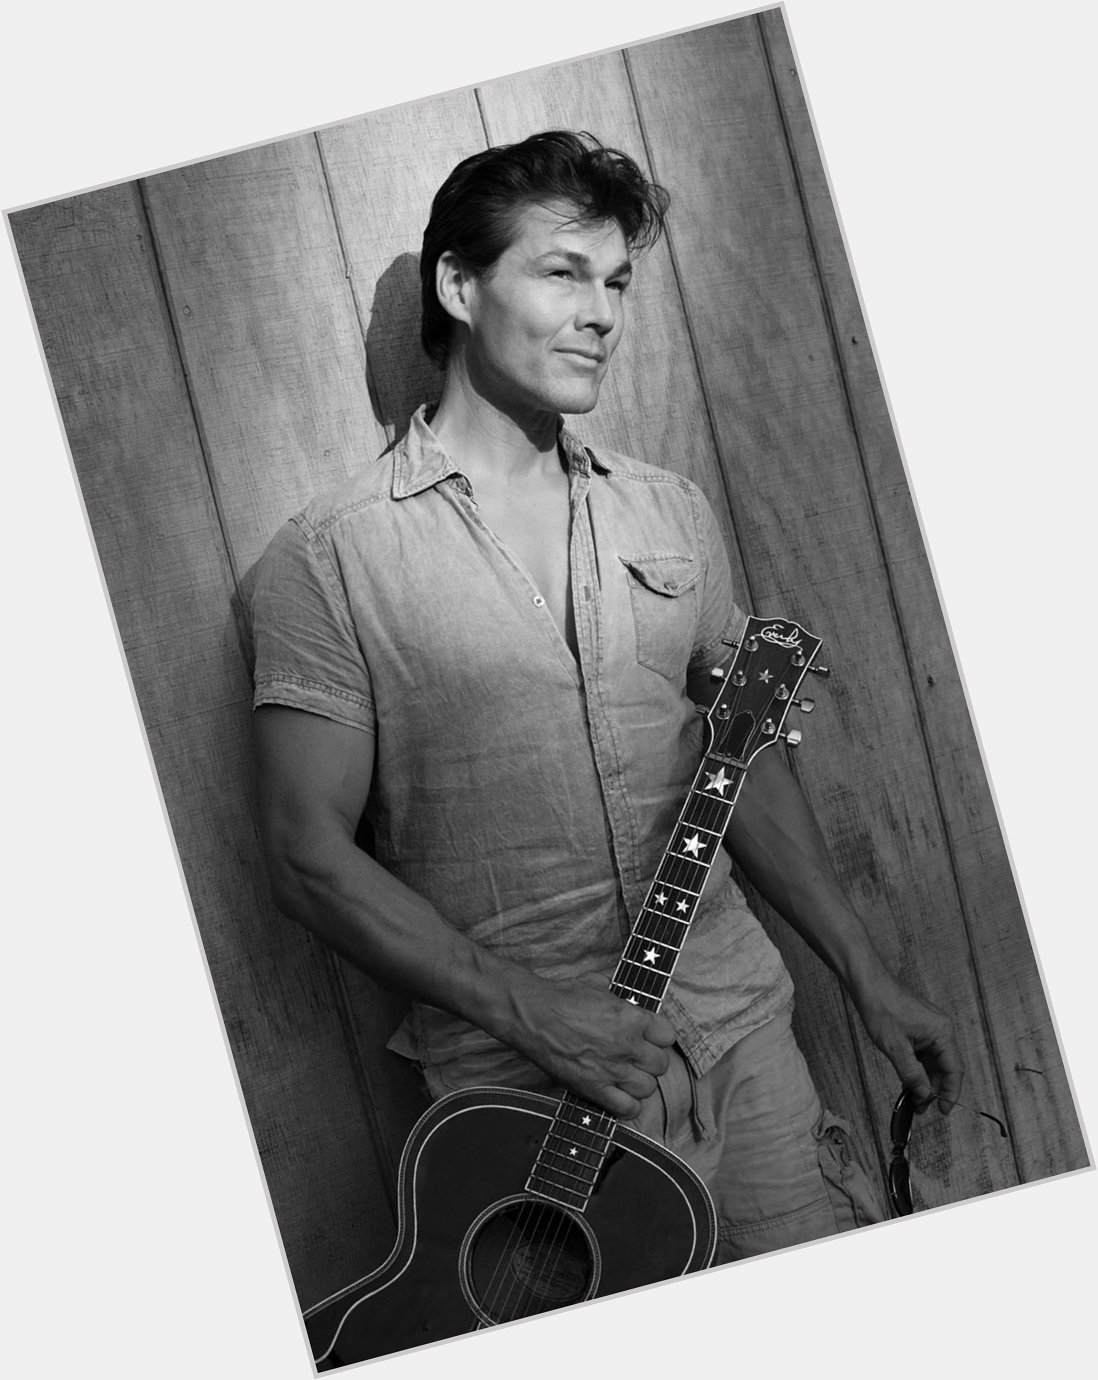 Happy birthday to Morten Harket from all at 